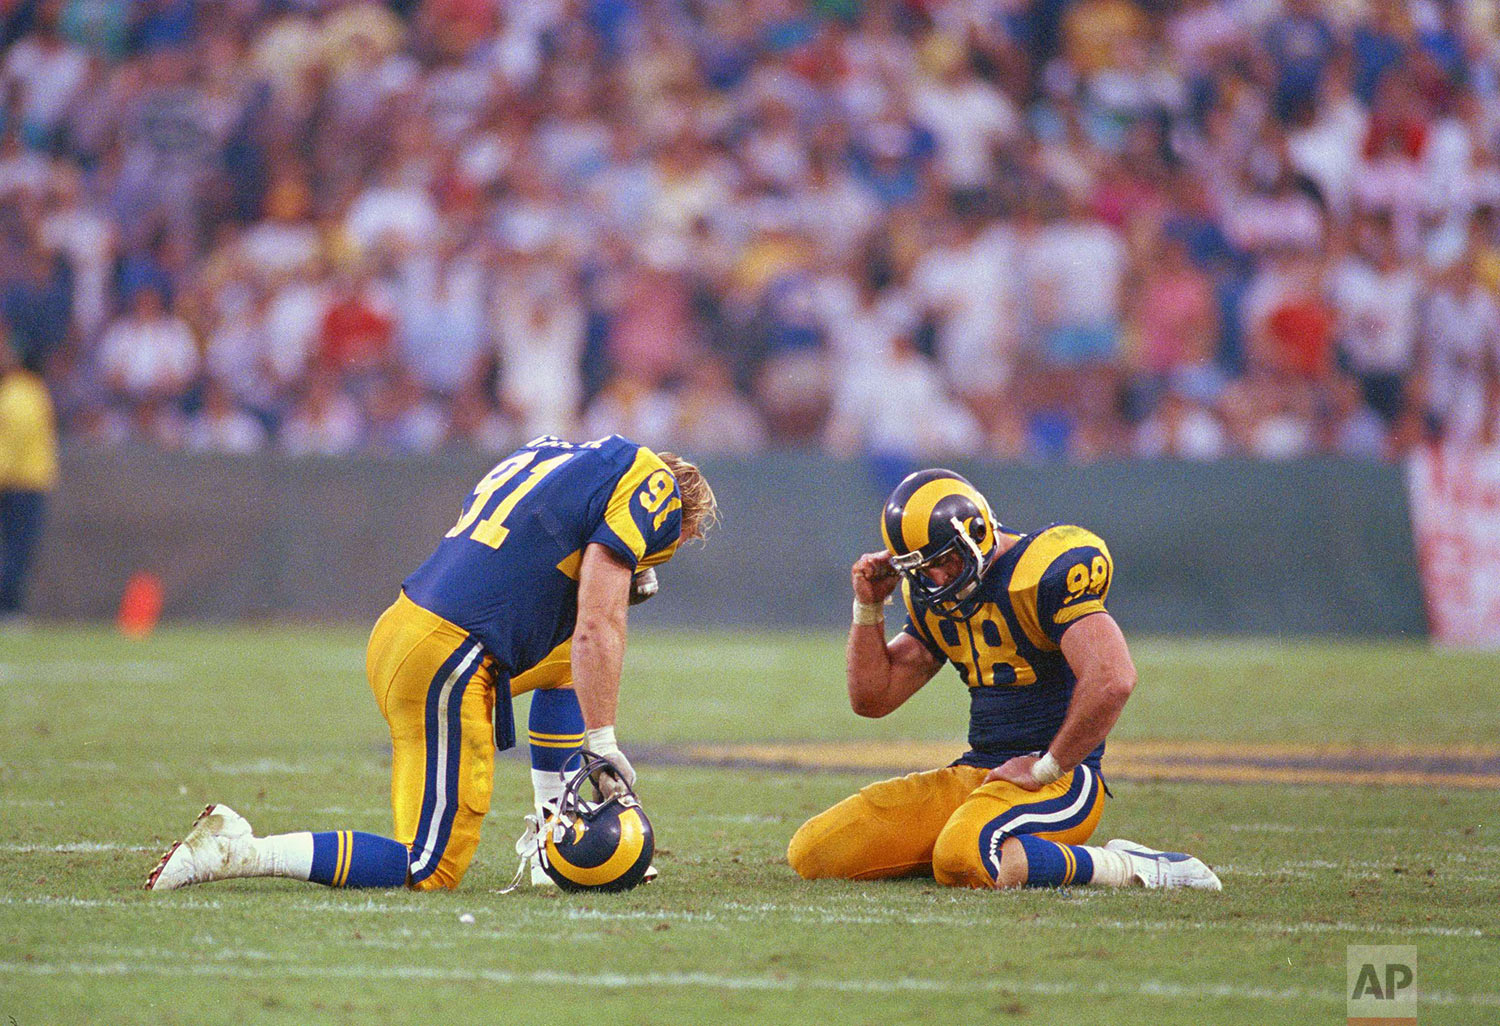  Los Angeles Rams defenders Kevin Greene, left, and Shawn Miller react after the New England Patriots quarterback Tony Eason threw a desperation pass in the end zone with time running out to defeat the Rams 30-28, Nov. 16, 1986, in Anaheim. Patriots 